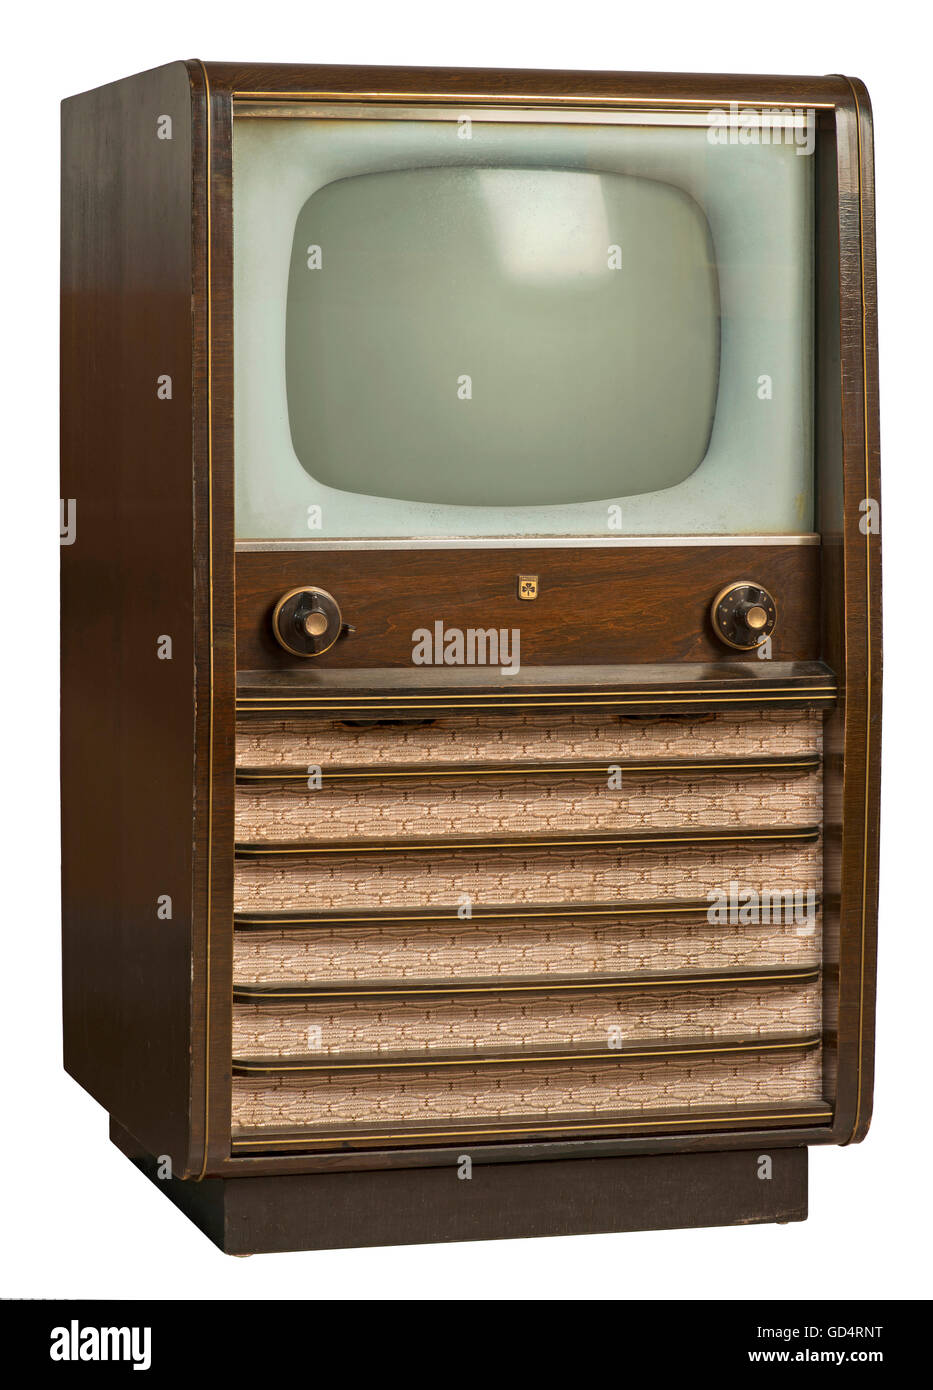 broadcast,television,Grundig,Type 550,Germany,1954,standalone device,black-white,body,exotic woods,TV device,screens,telescreen,TV screen,economy,economic miracle,economic miracles,engineering,technics,medium,media,clipping,cut out,cut-out,cut-outs,tube systems,tubes-receiver,television set,TV set,television sets,TV sets,TVs,electric appliance,electrical device,electric appliances,electrical devices,electrical,electric,device,devices,apparatus,apparatuses,object,objects,stills,tube television,television,TV,technol,Additional-Rights-Clearences-Not Available Stock Photo